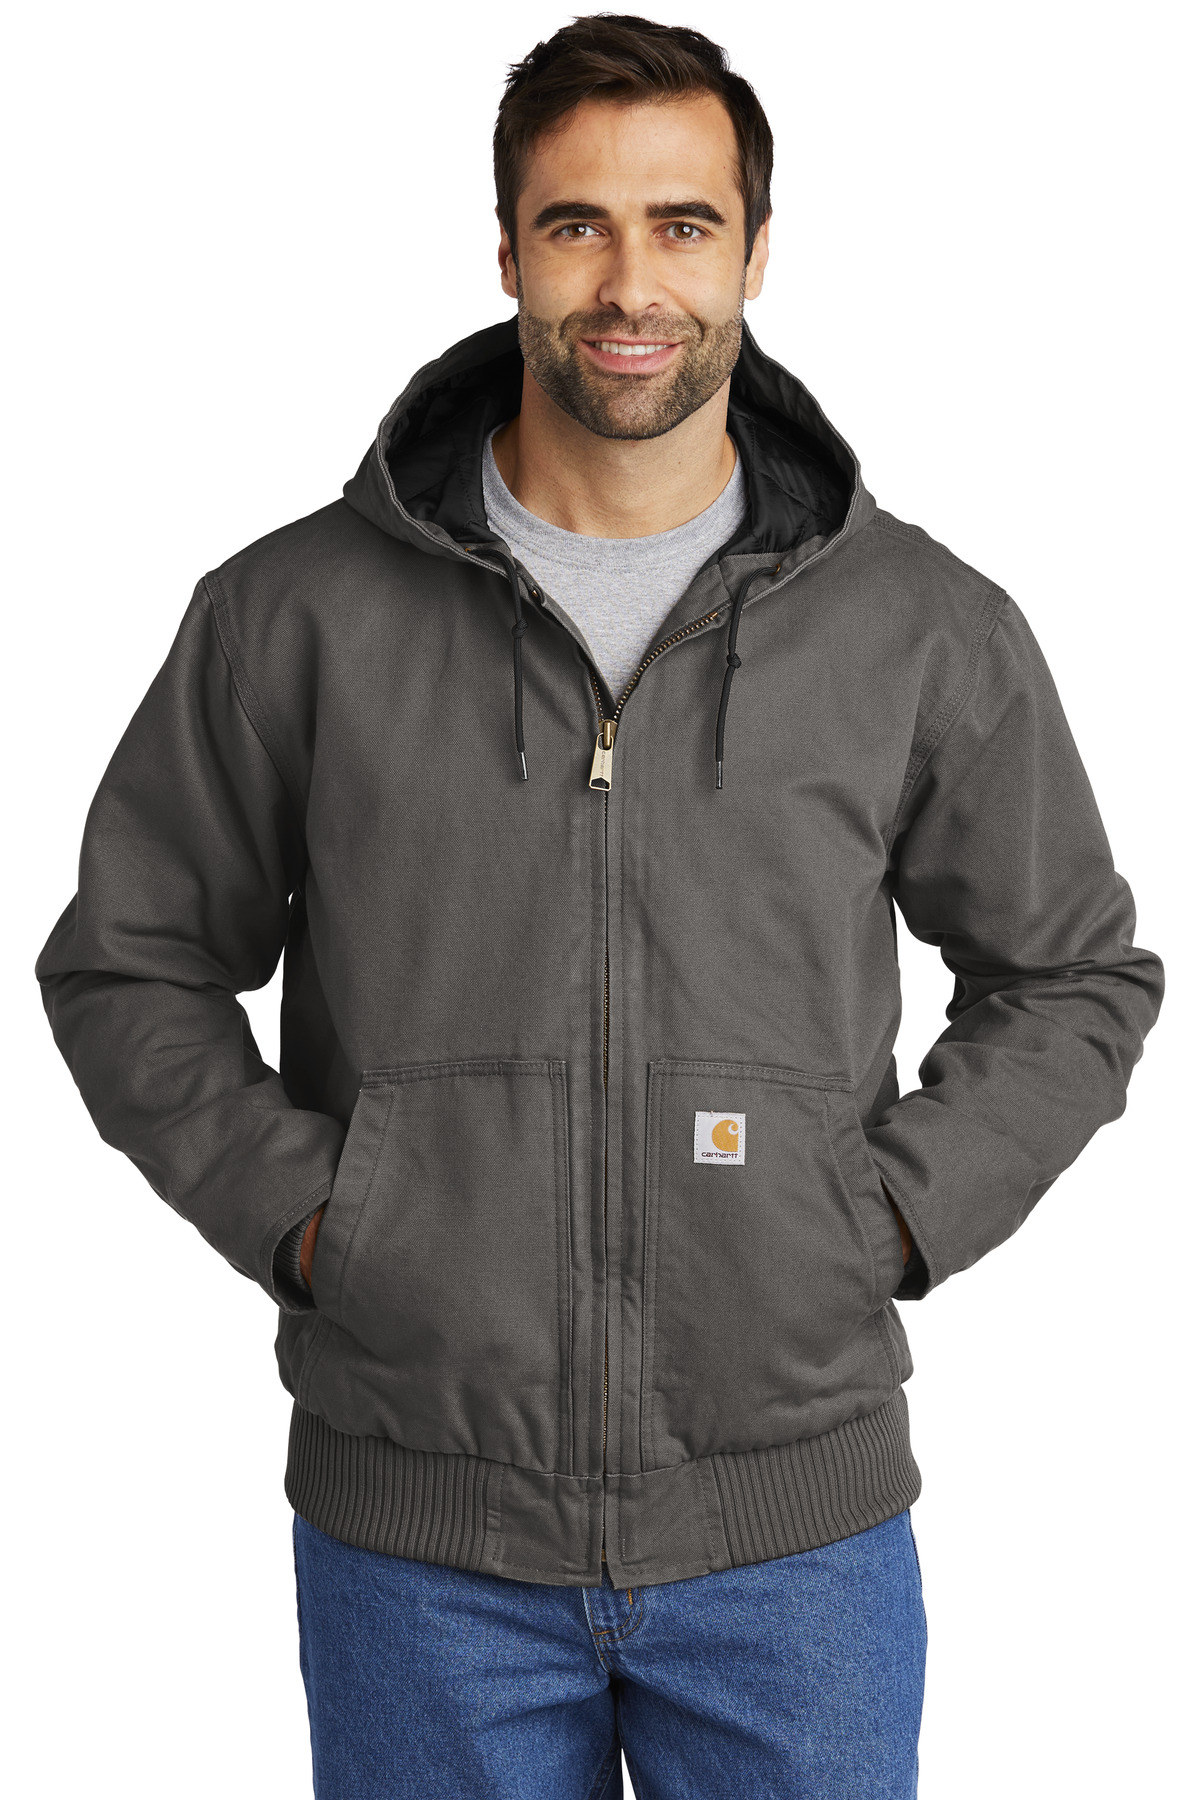 Carhartt ® Washed Duck Active Jac. CT104050 Custom Embroidered ...